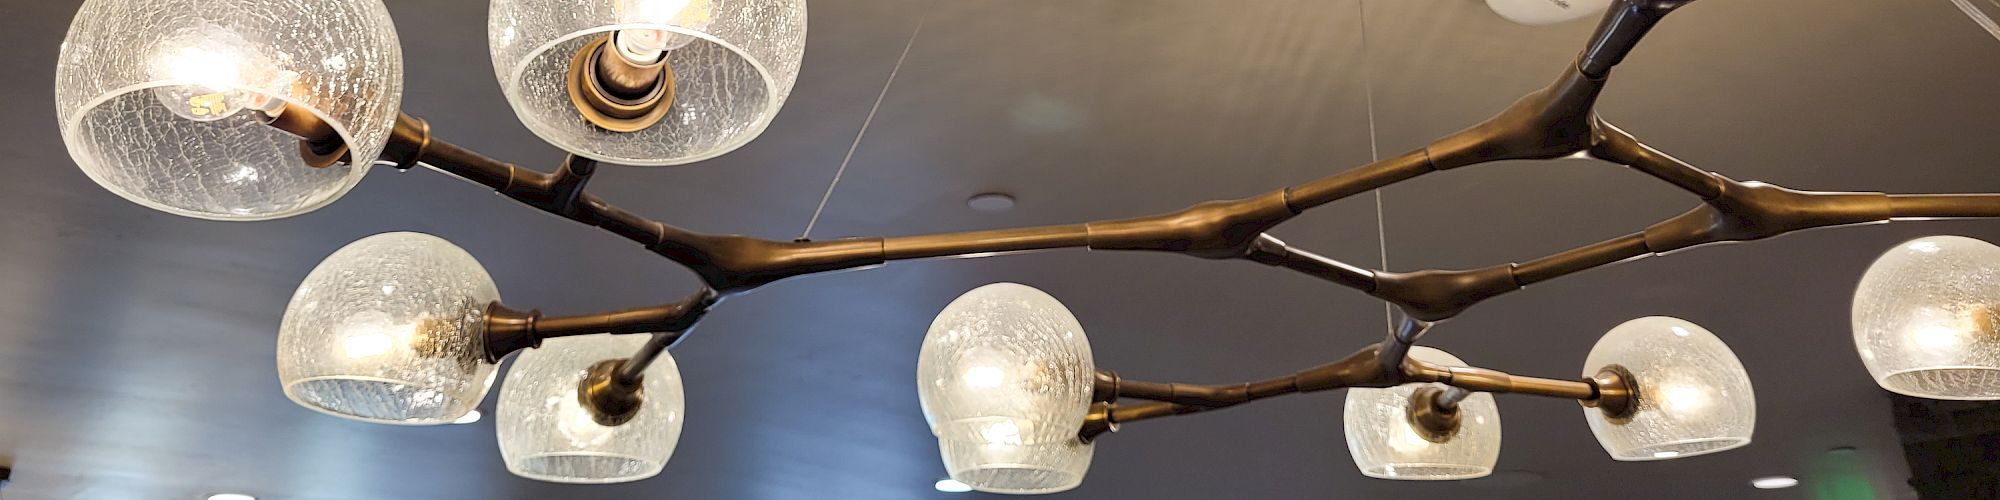 The image shows a decorative ceiling light fixture with multiple globes containing light bulbs, resembling a modern and artistic design.